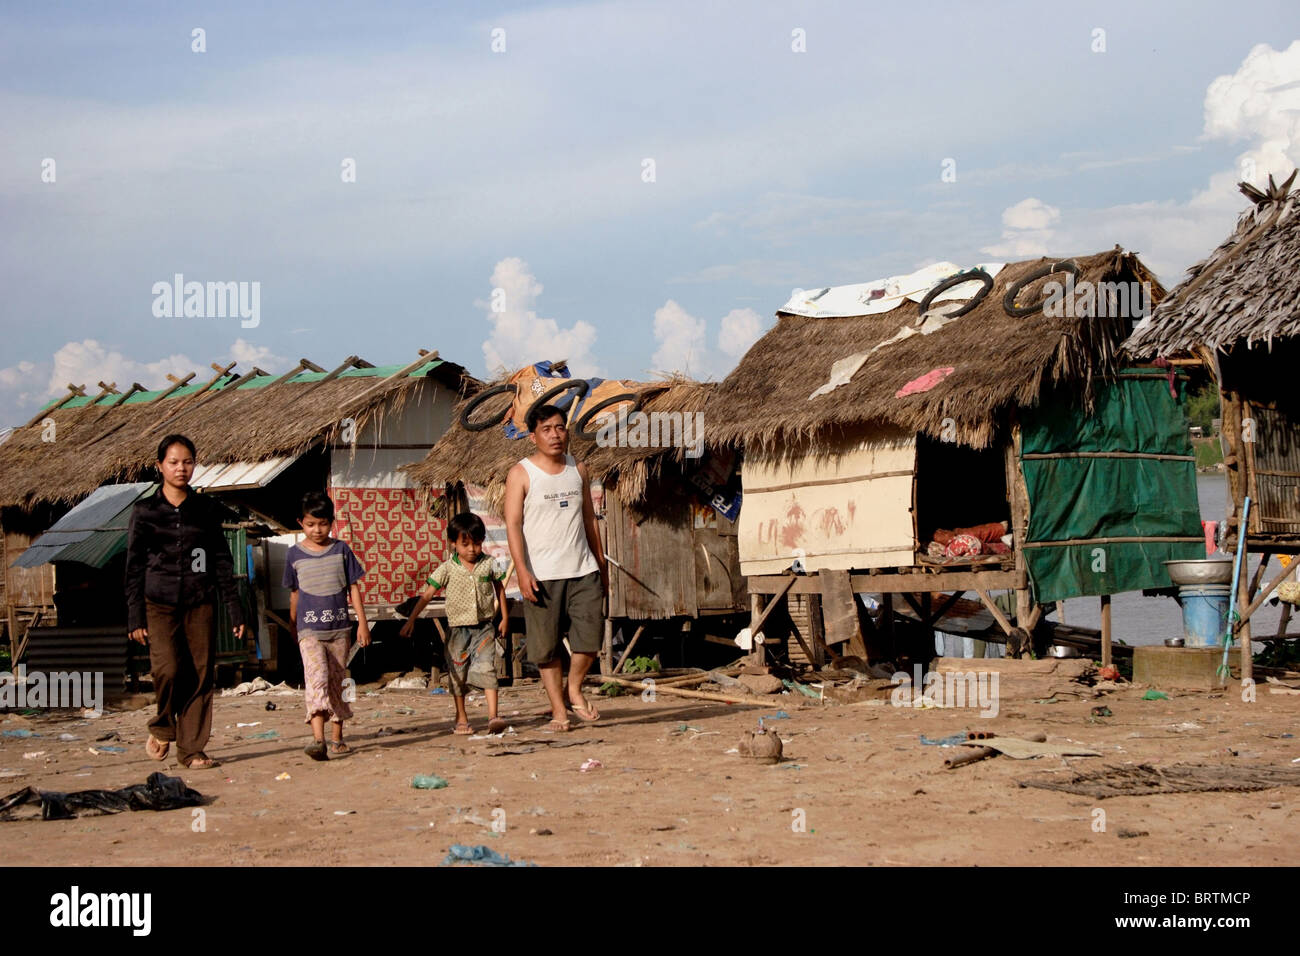 A family is leaving a squatter's slum where people are living in poverty on the bank of a Mekong River in Kampong Cham Cambodia. Stock Photo